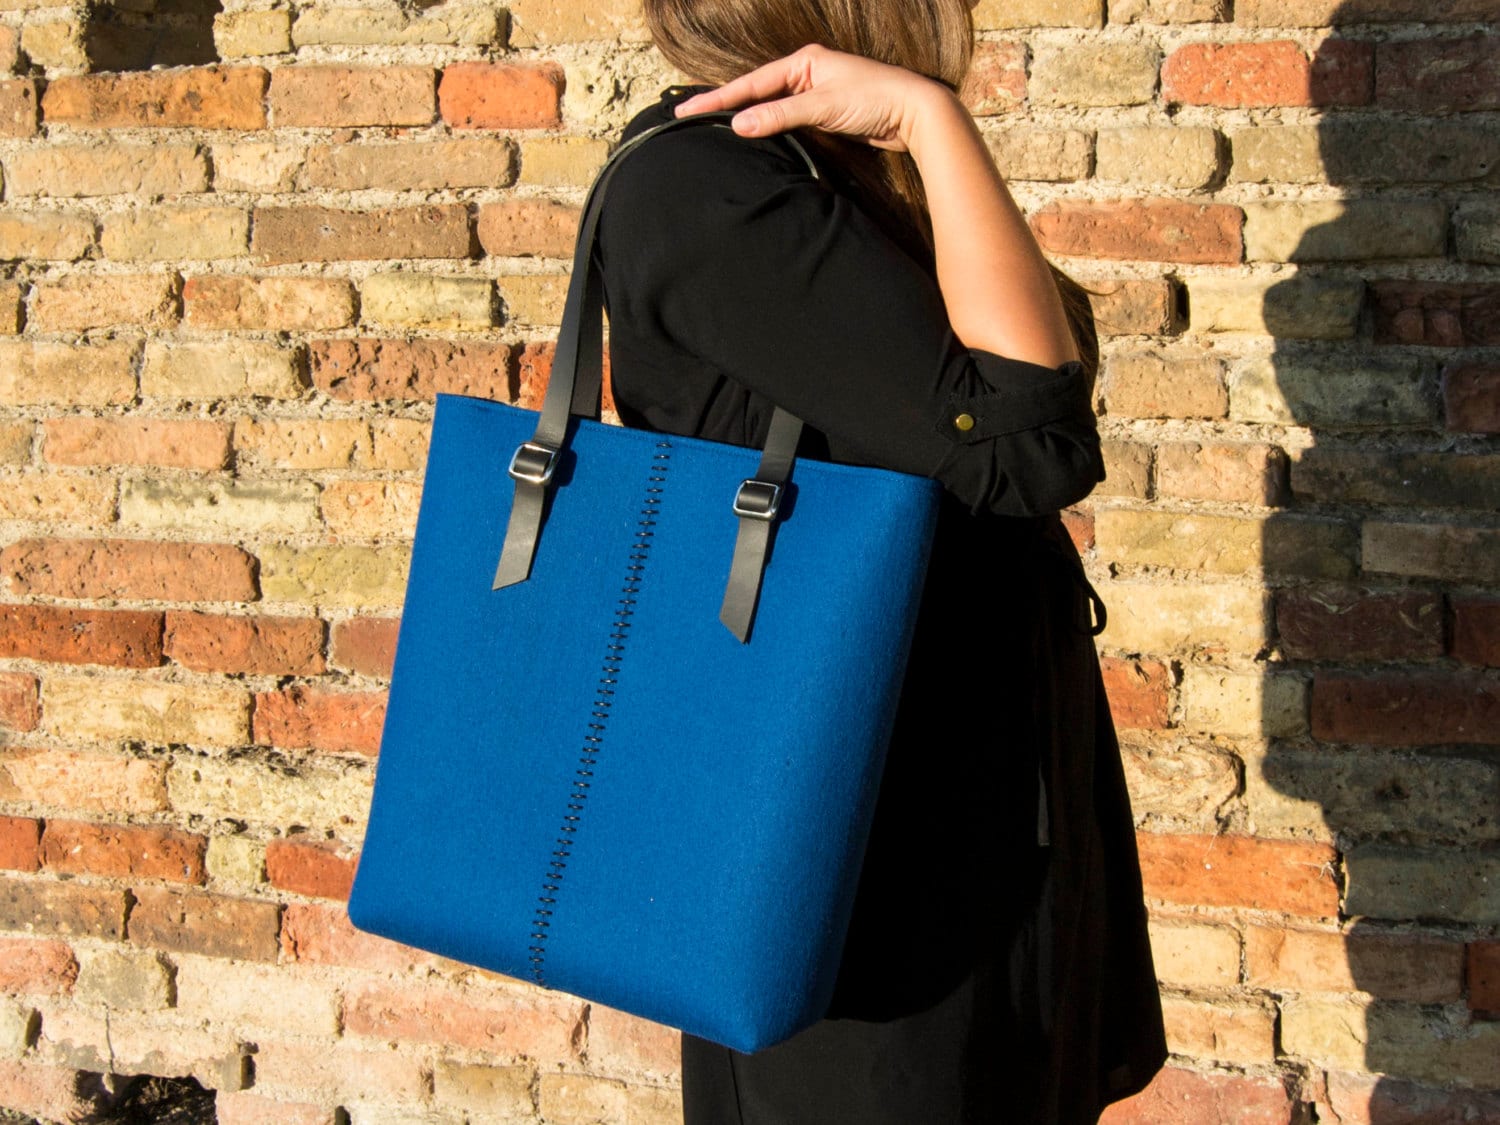 Wool felt TOTE BAG with leather straps - deep blue - made in Italy